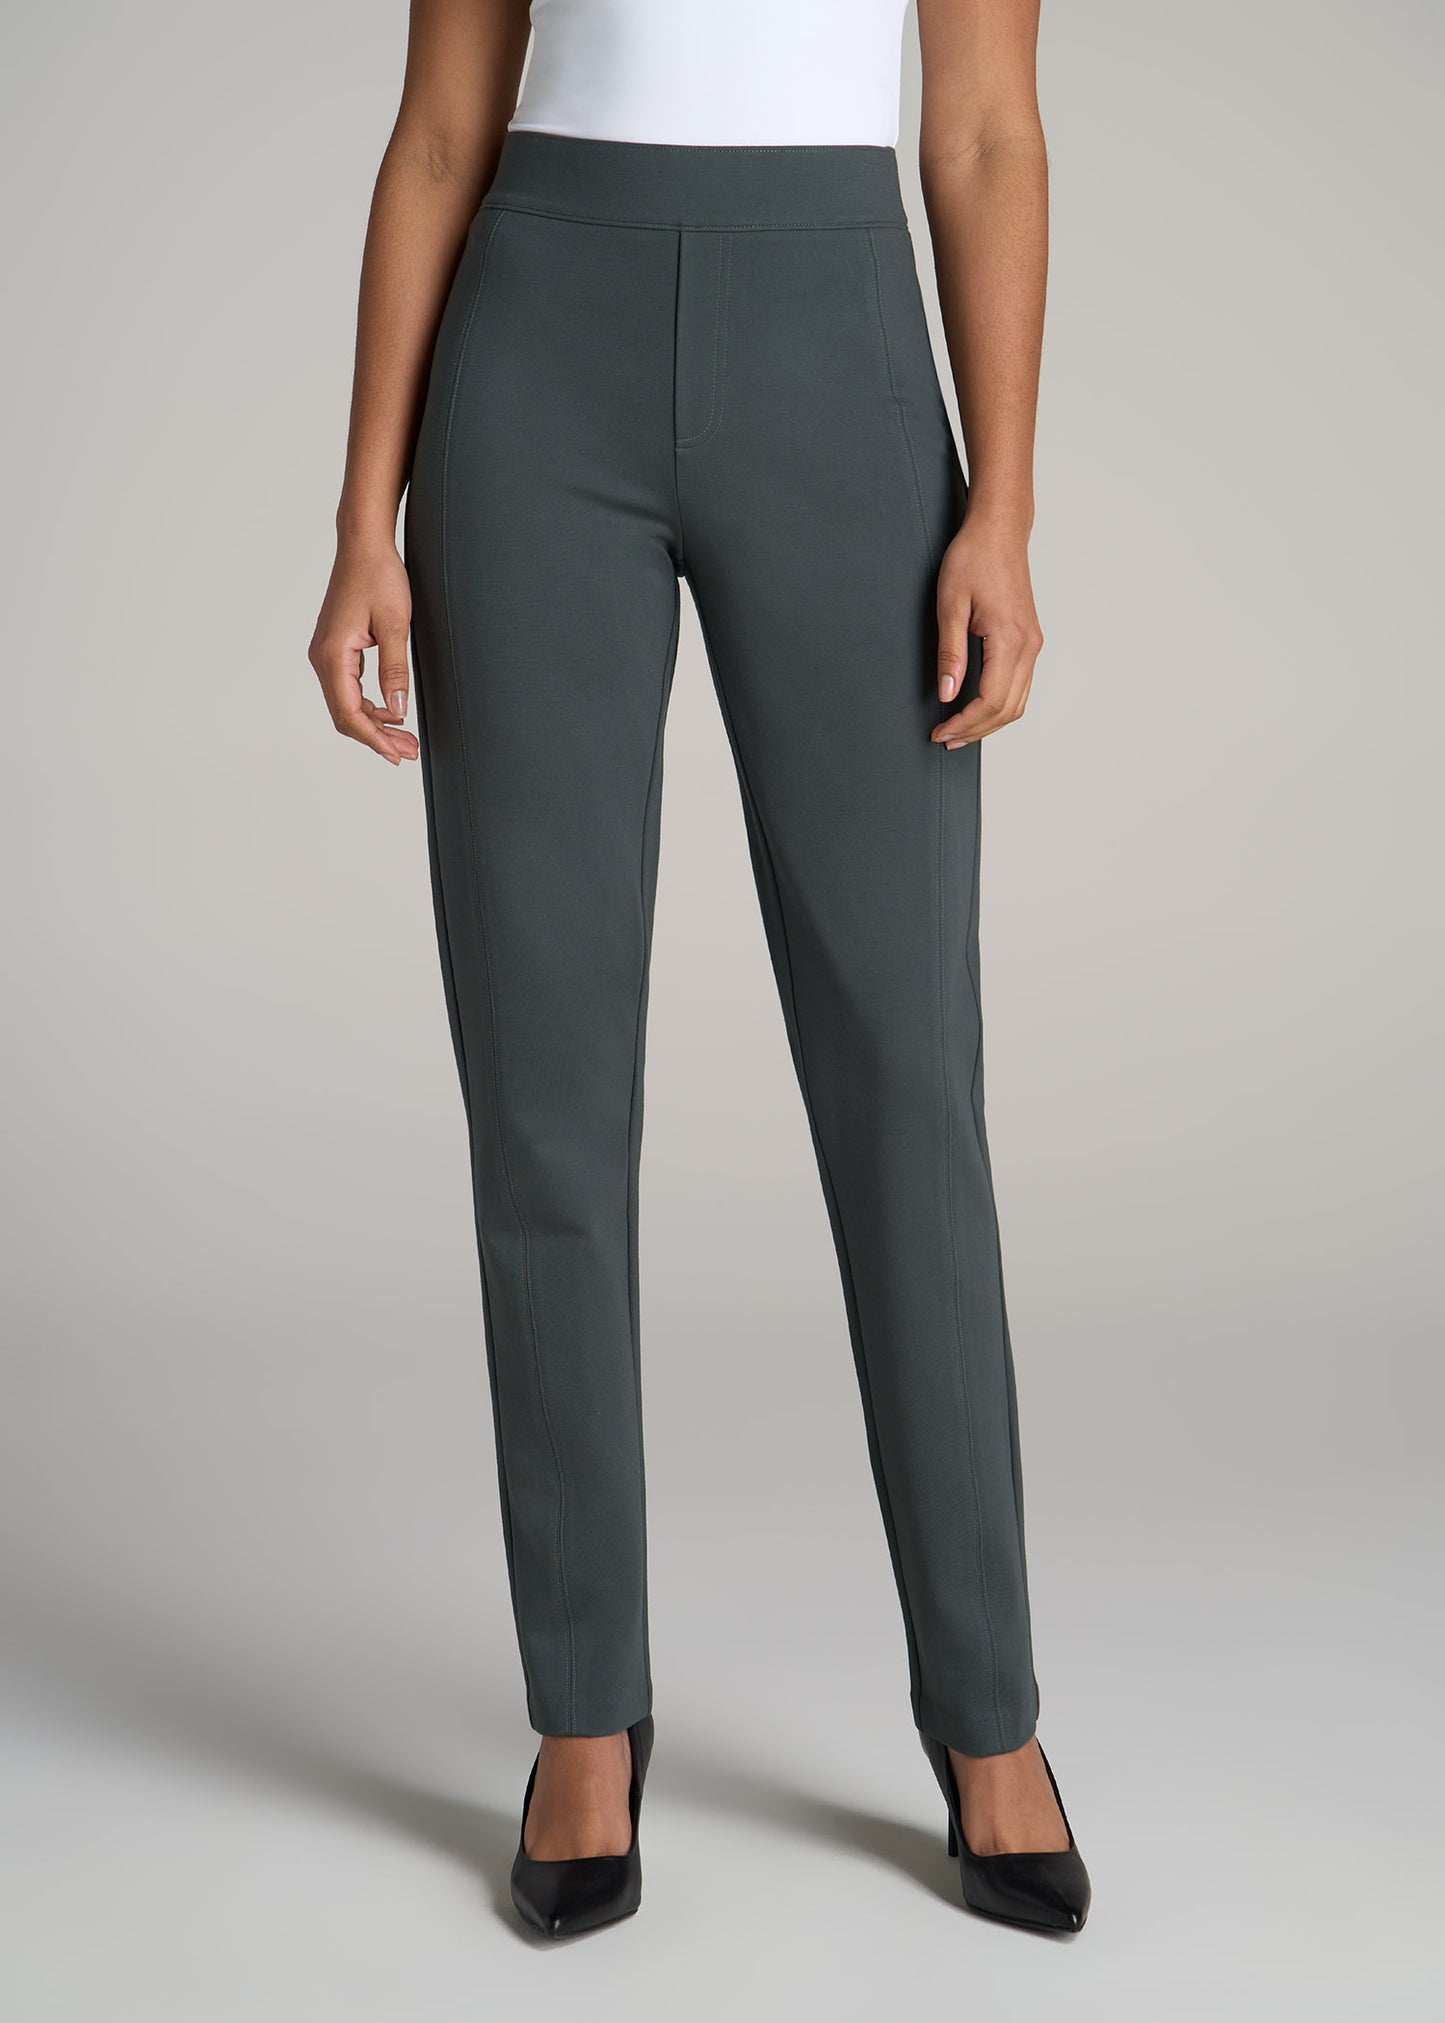 Pull-on Slim Dress Pants for Tall Women in Soft Green